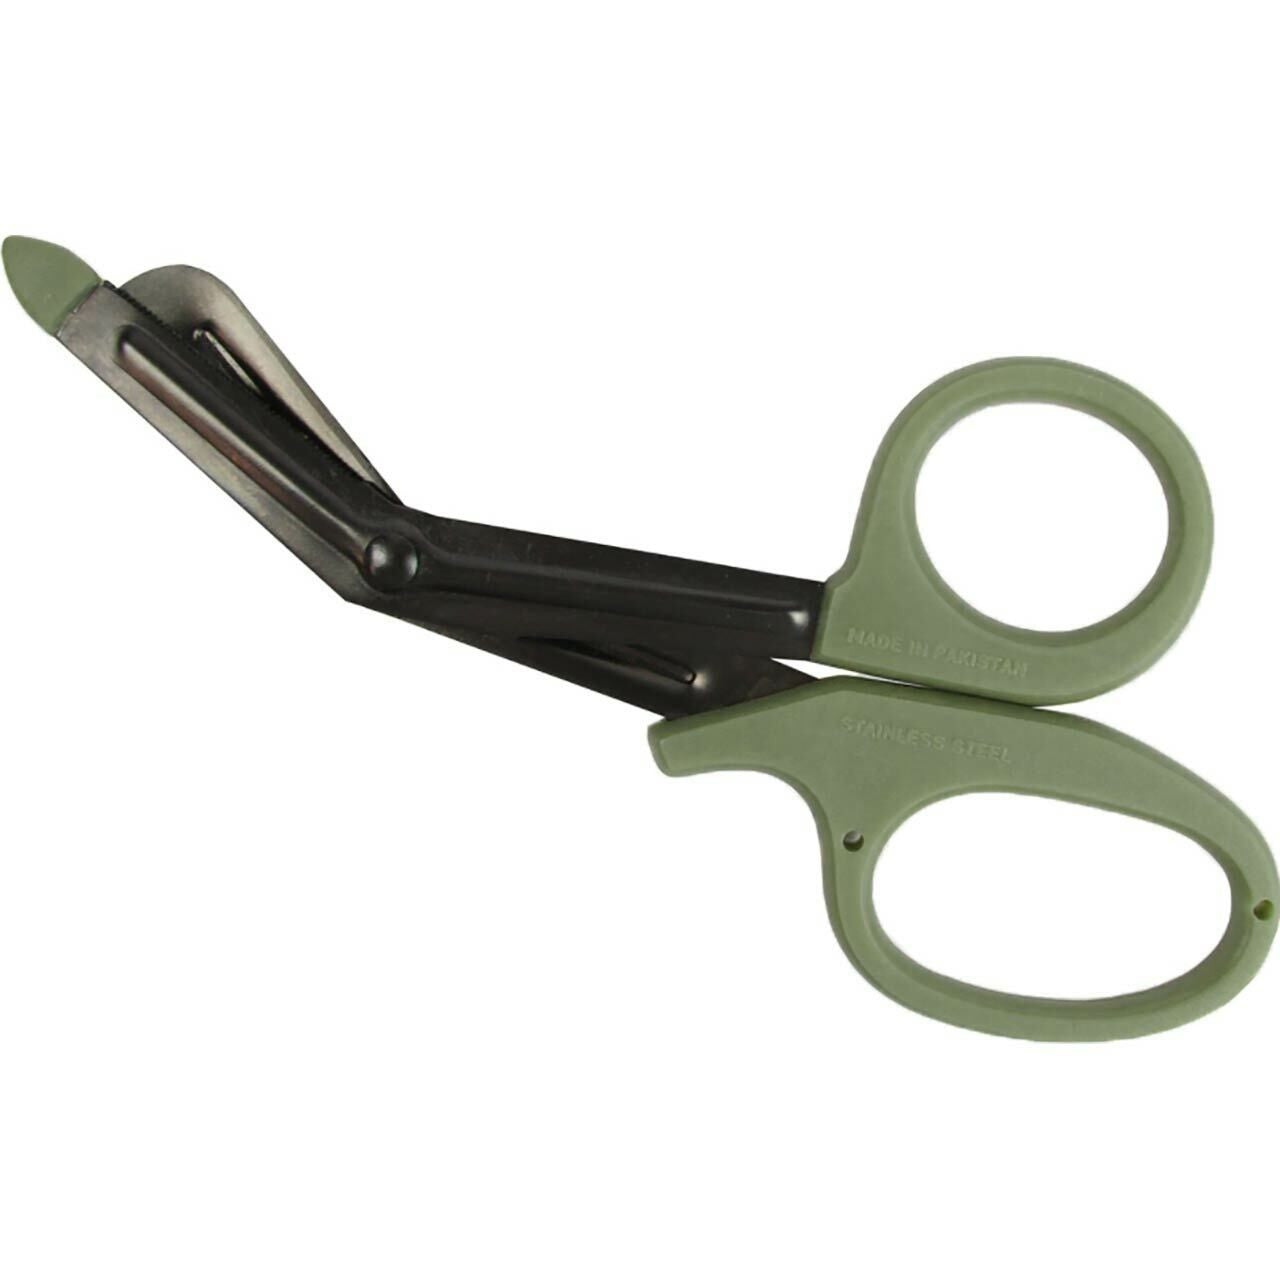 Ultra-Grip 6.5in Precision Stainless Steel Scissor - Pastel Yellow